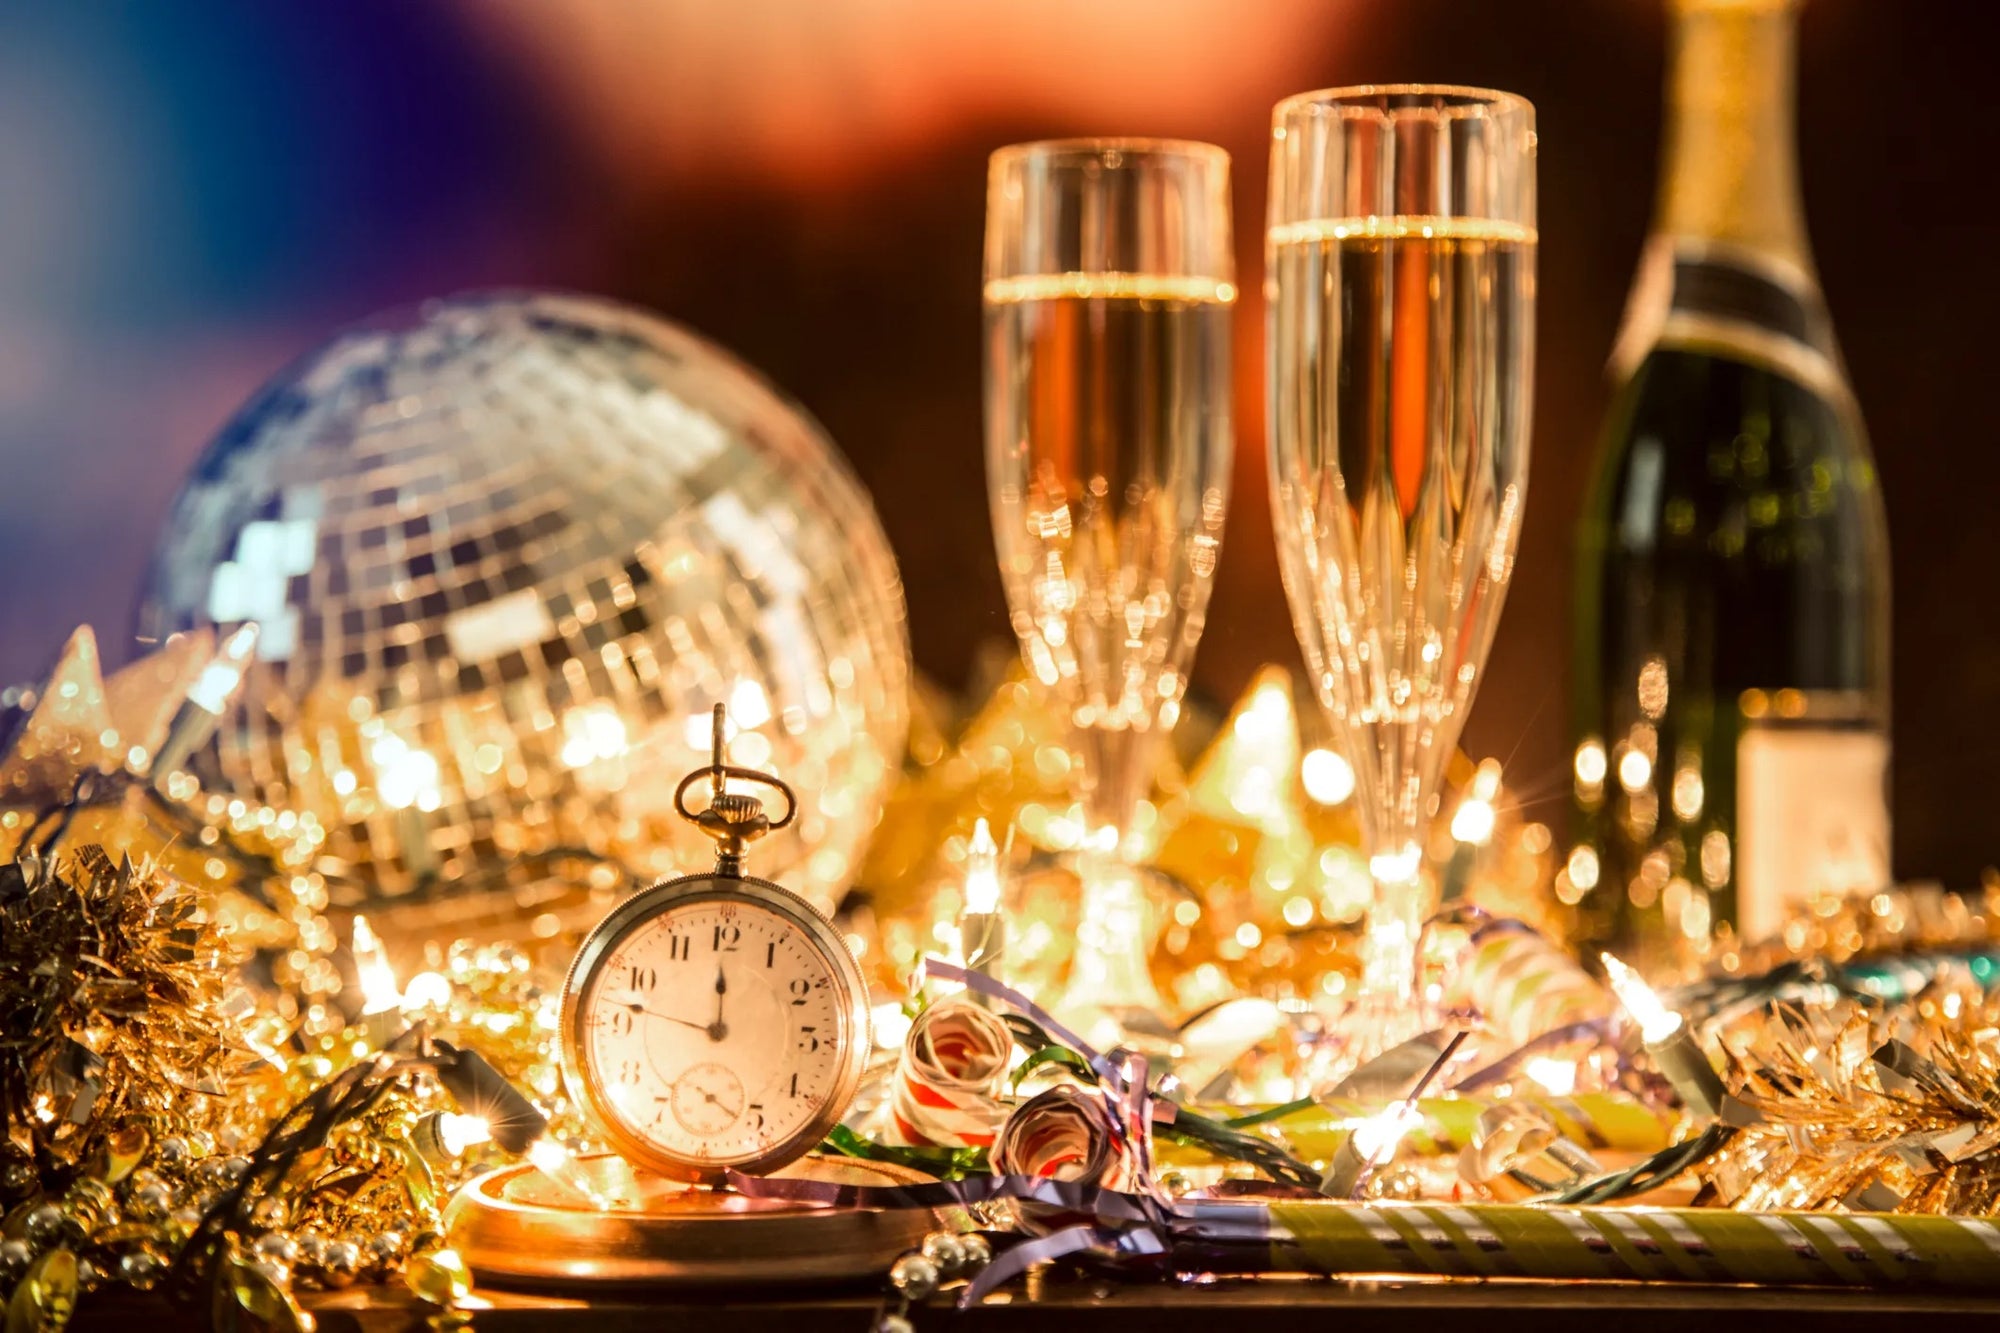 New Year's Eve Celebration and Midnight Toast